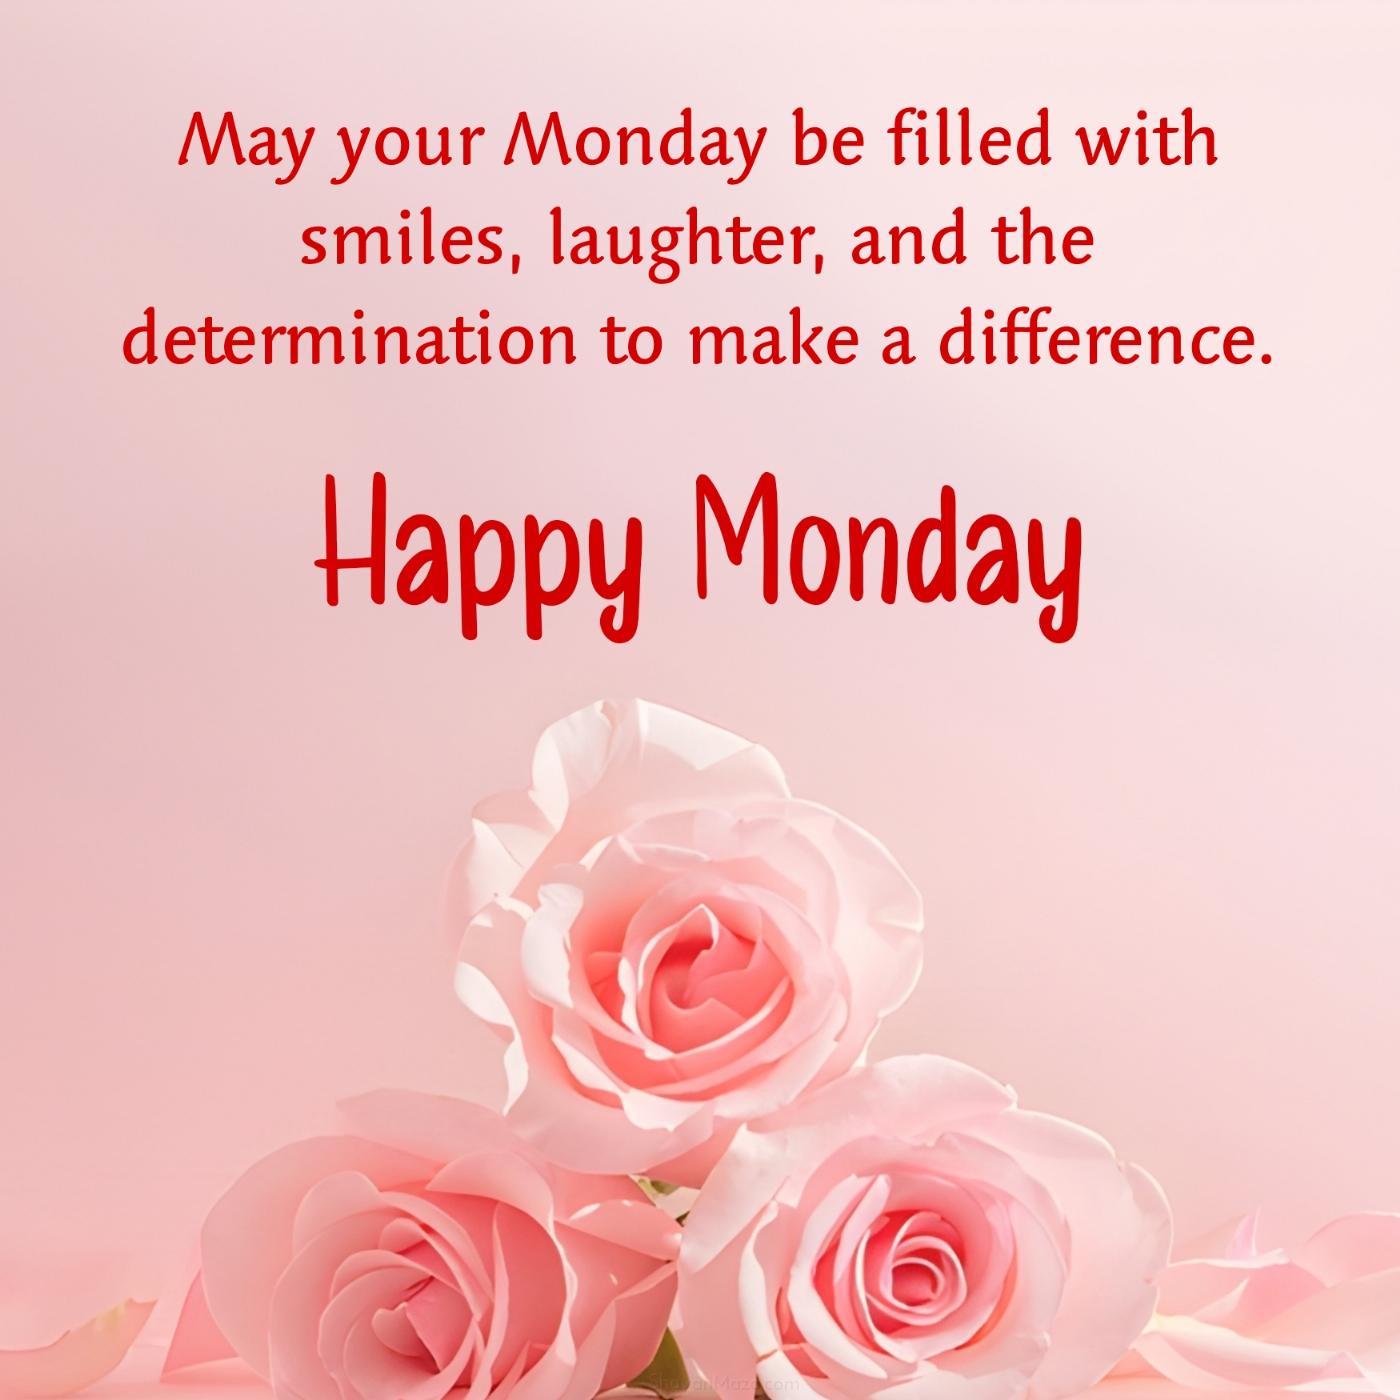 May your Monday be filled with smiles laughter and the determination